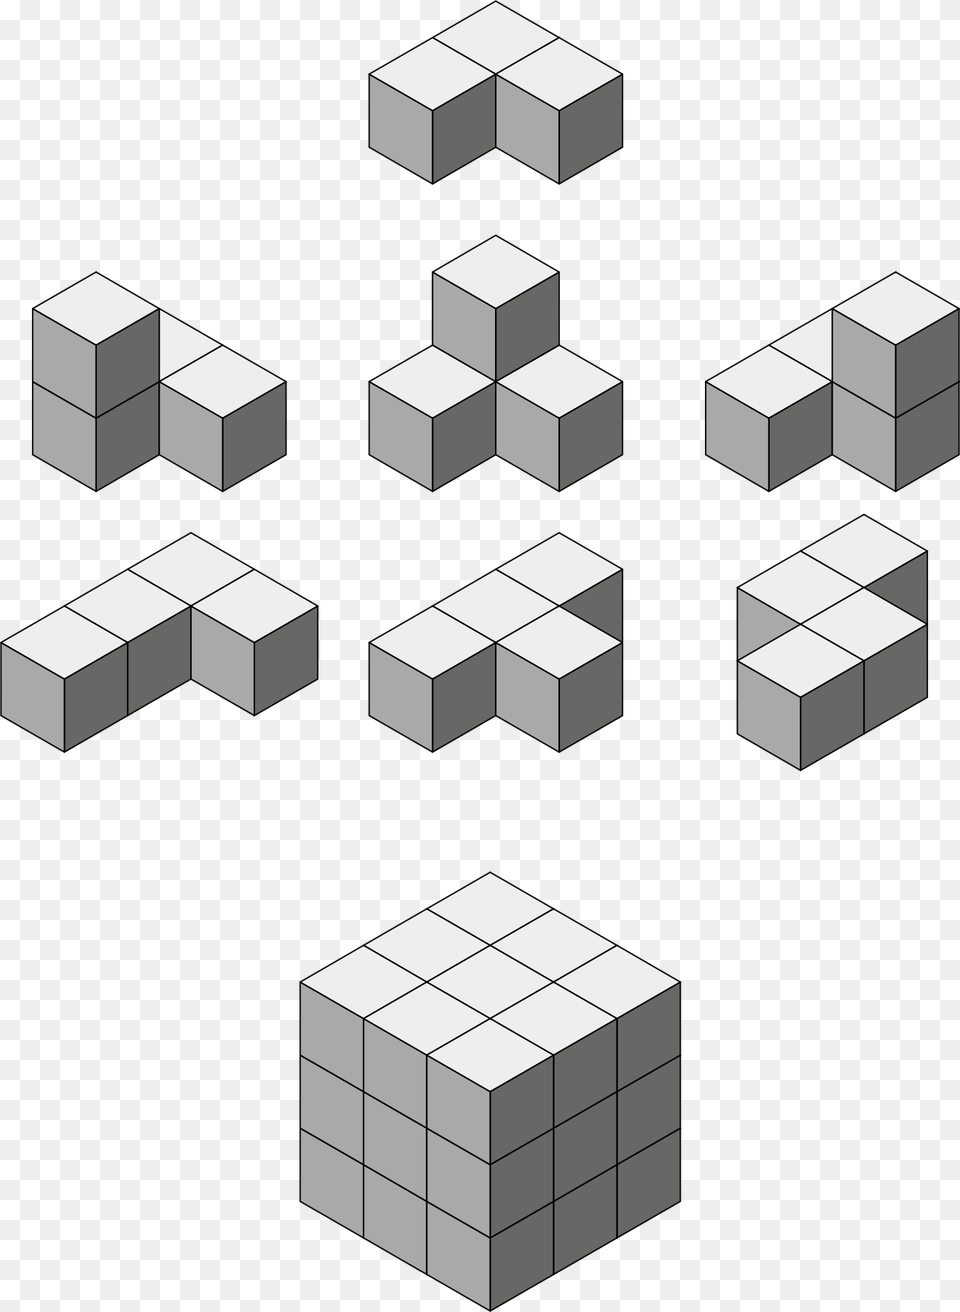 Soma Cube, Toy, Chess, Game, Rubix Cube Free Transparent Png